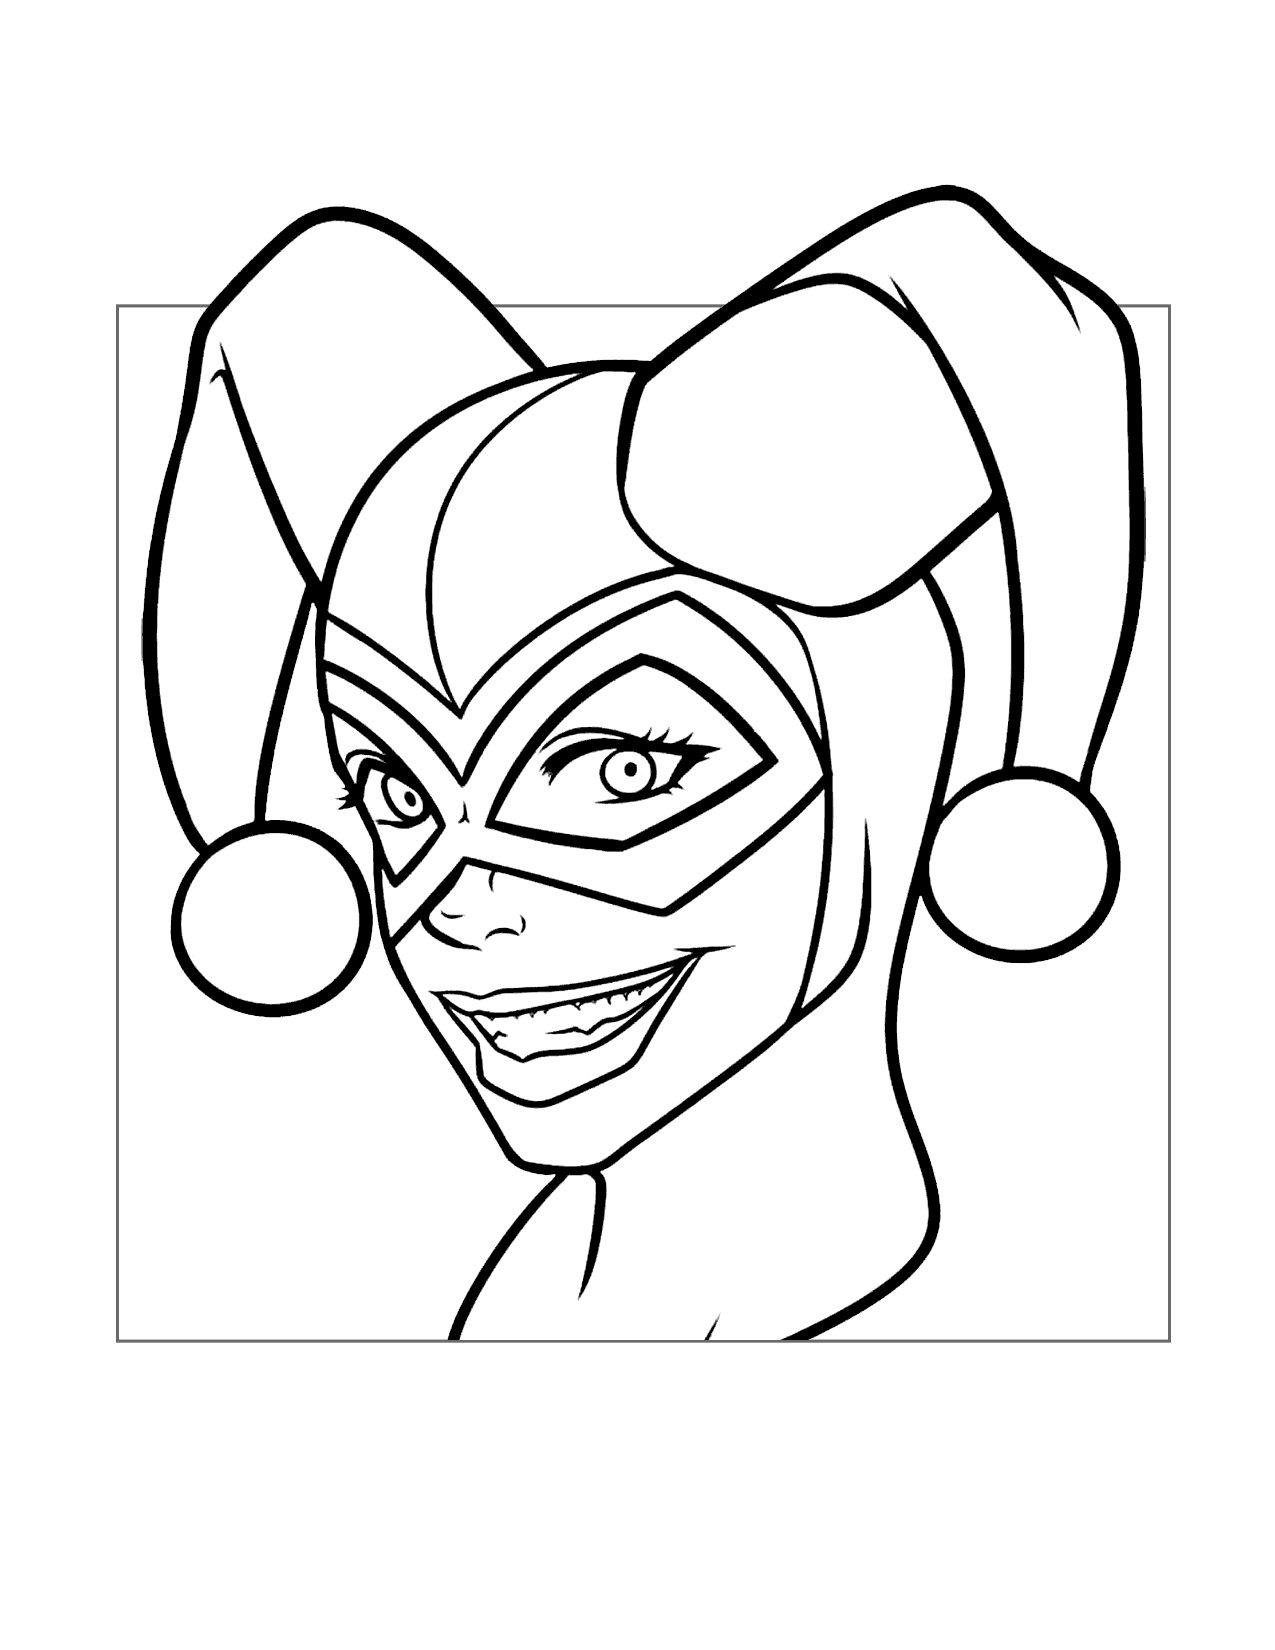 Harley quinn pages â printable pages